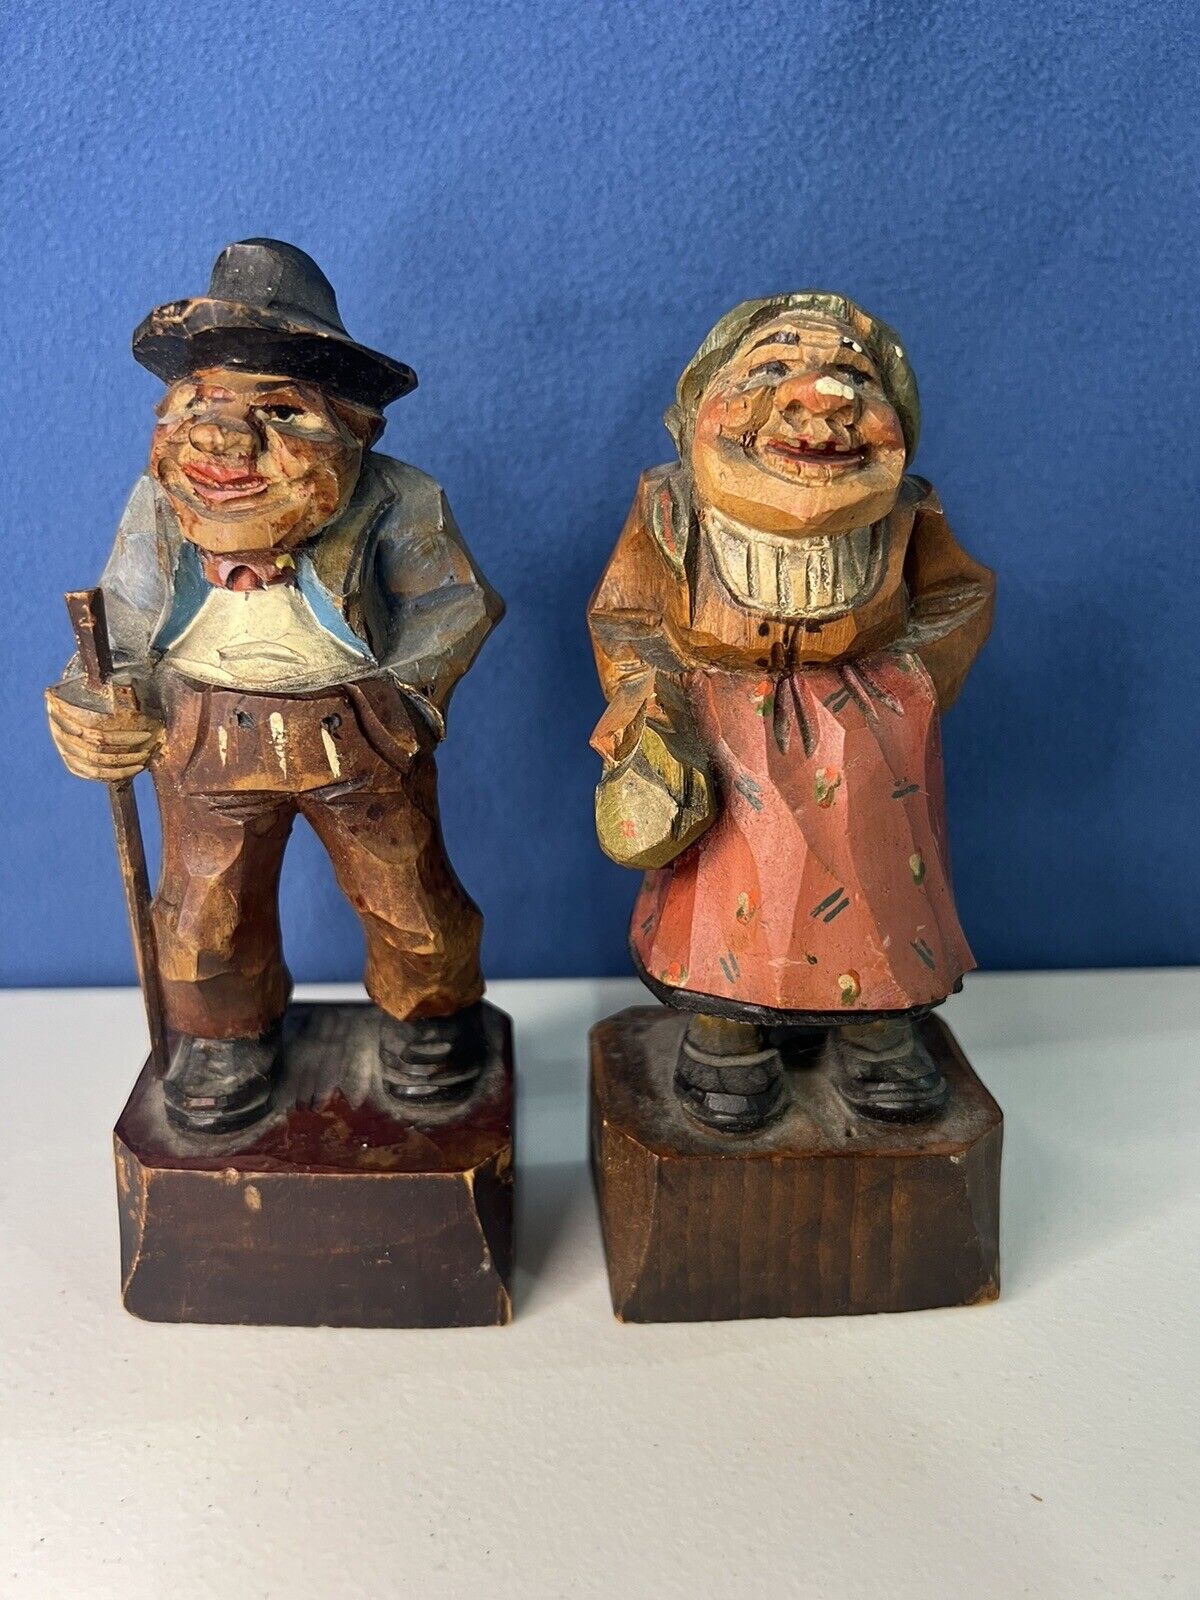 Vintage Hand Carved Anri Handpainted Wooden Old Lady and Man Figurines Italy